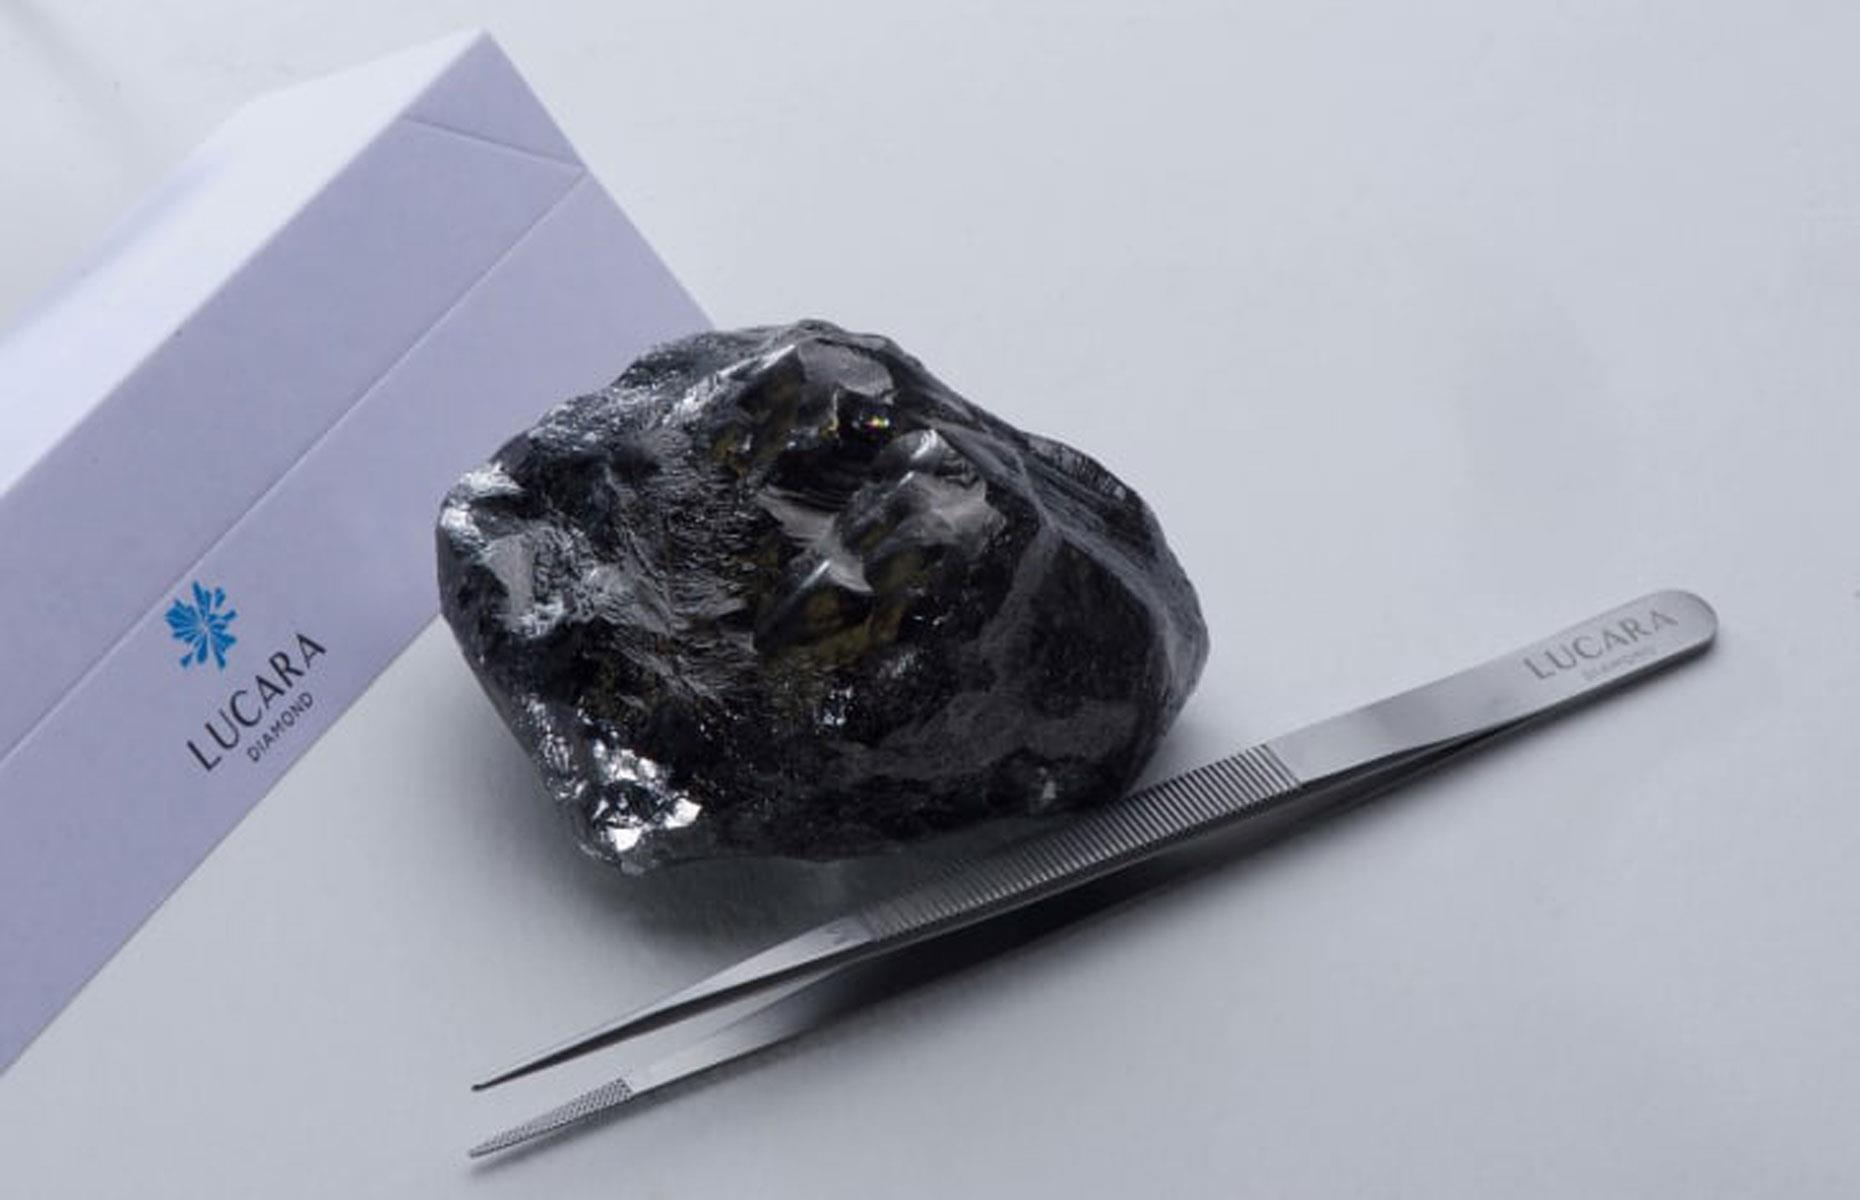 2019: The second-largest diamond ever mined 